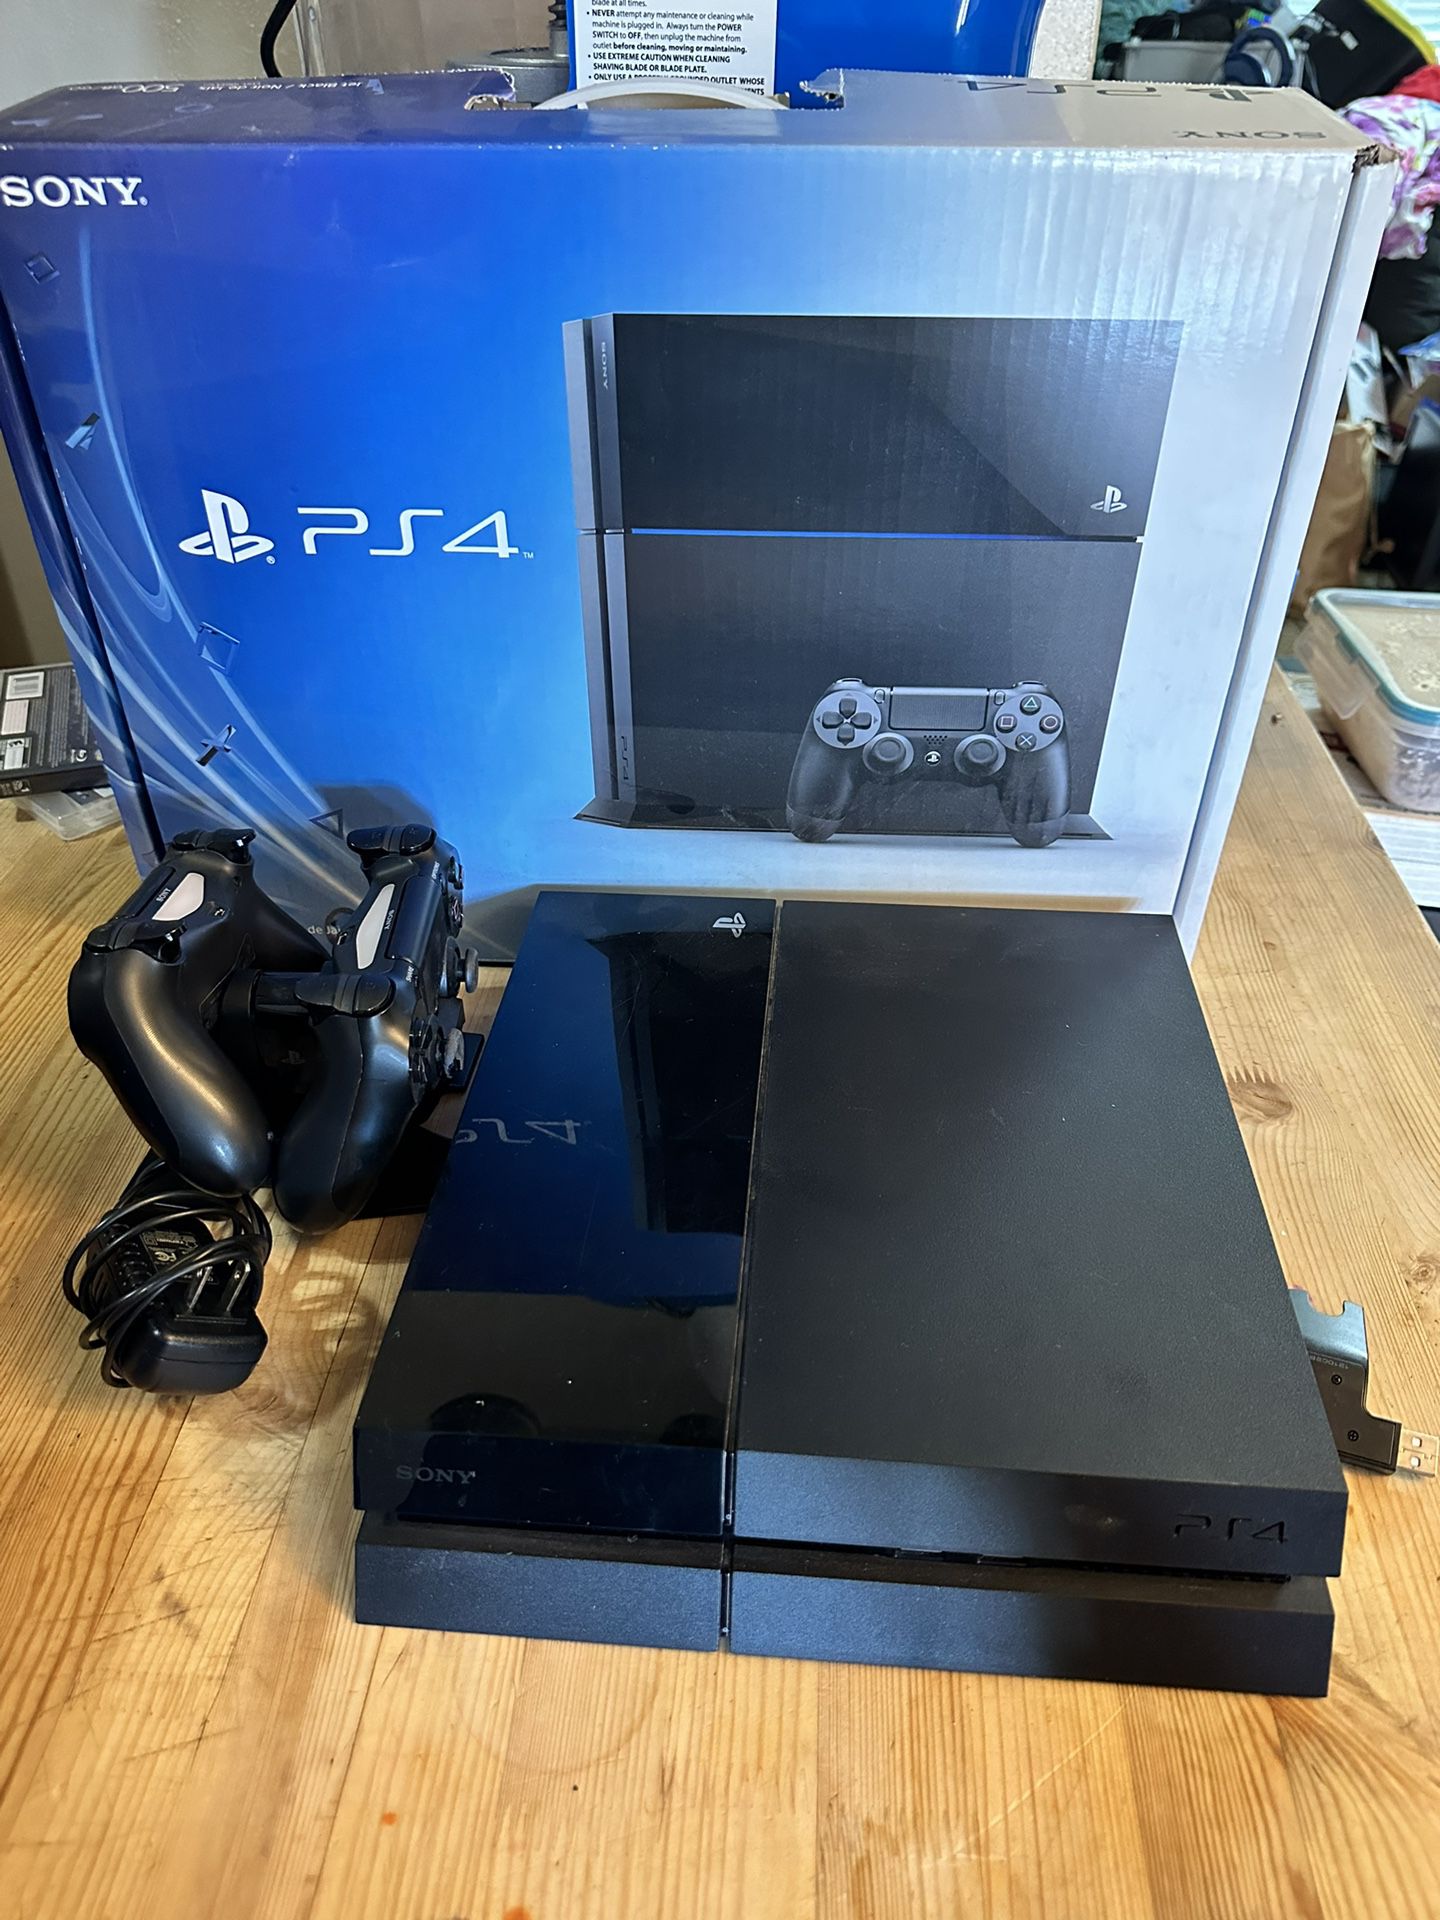 PS4 In Original Box With 2 Controllers And 31 Games 